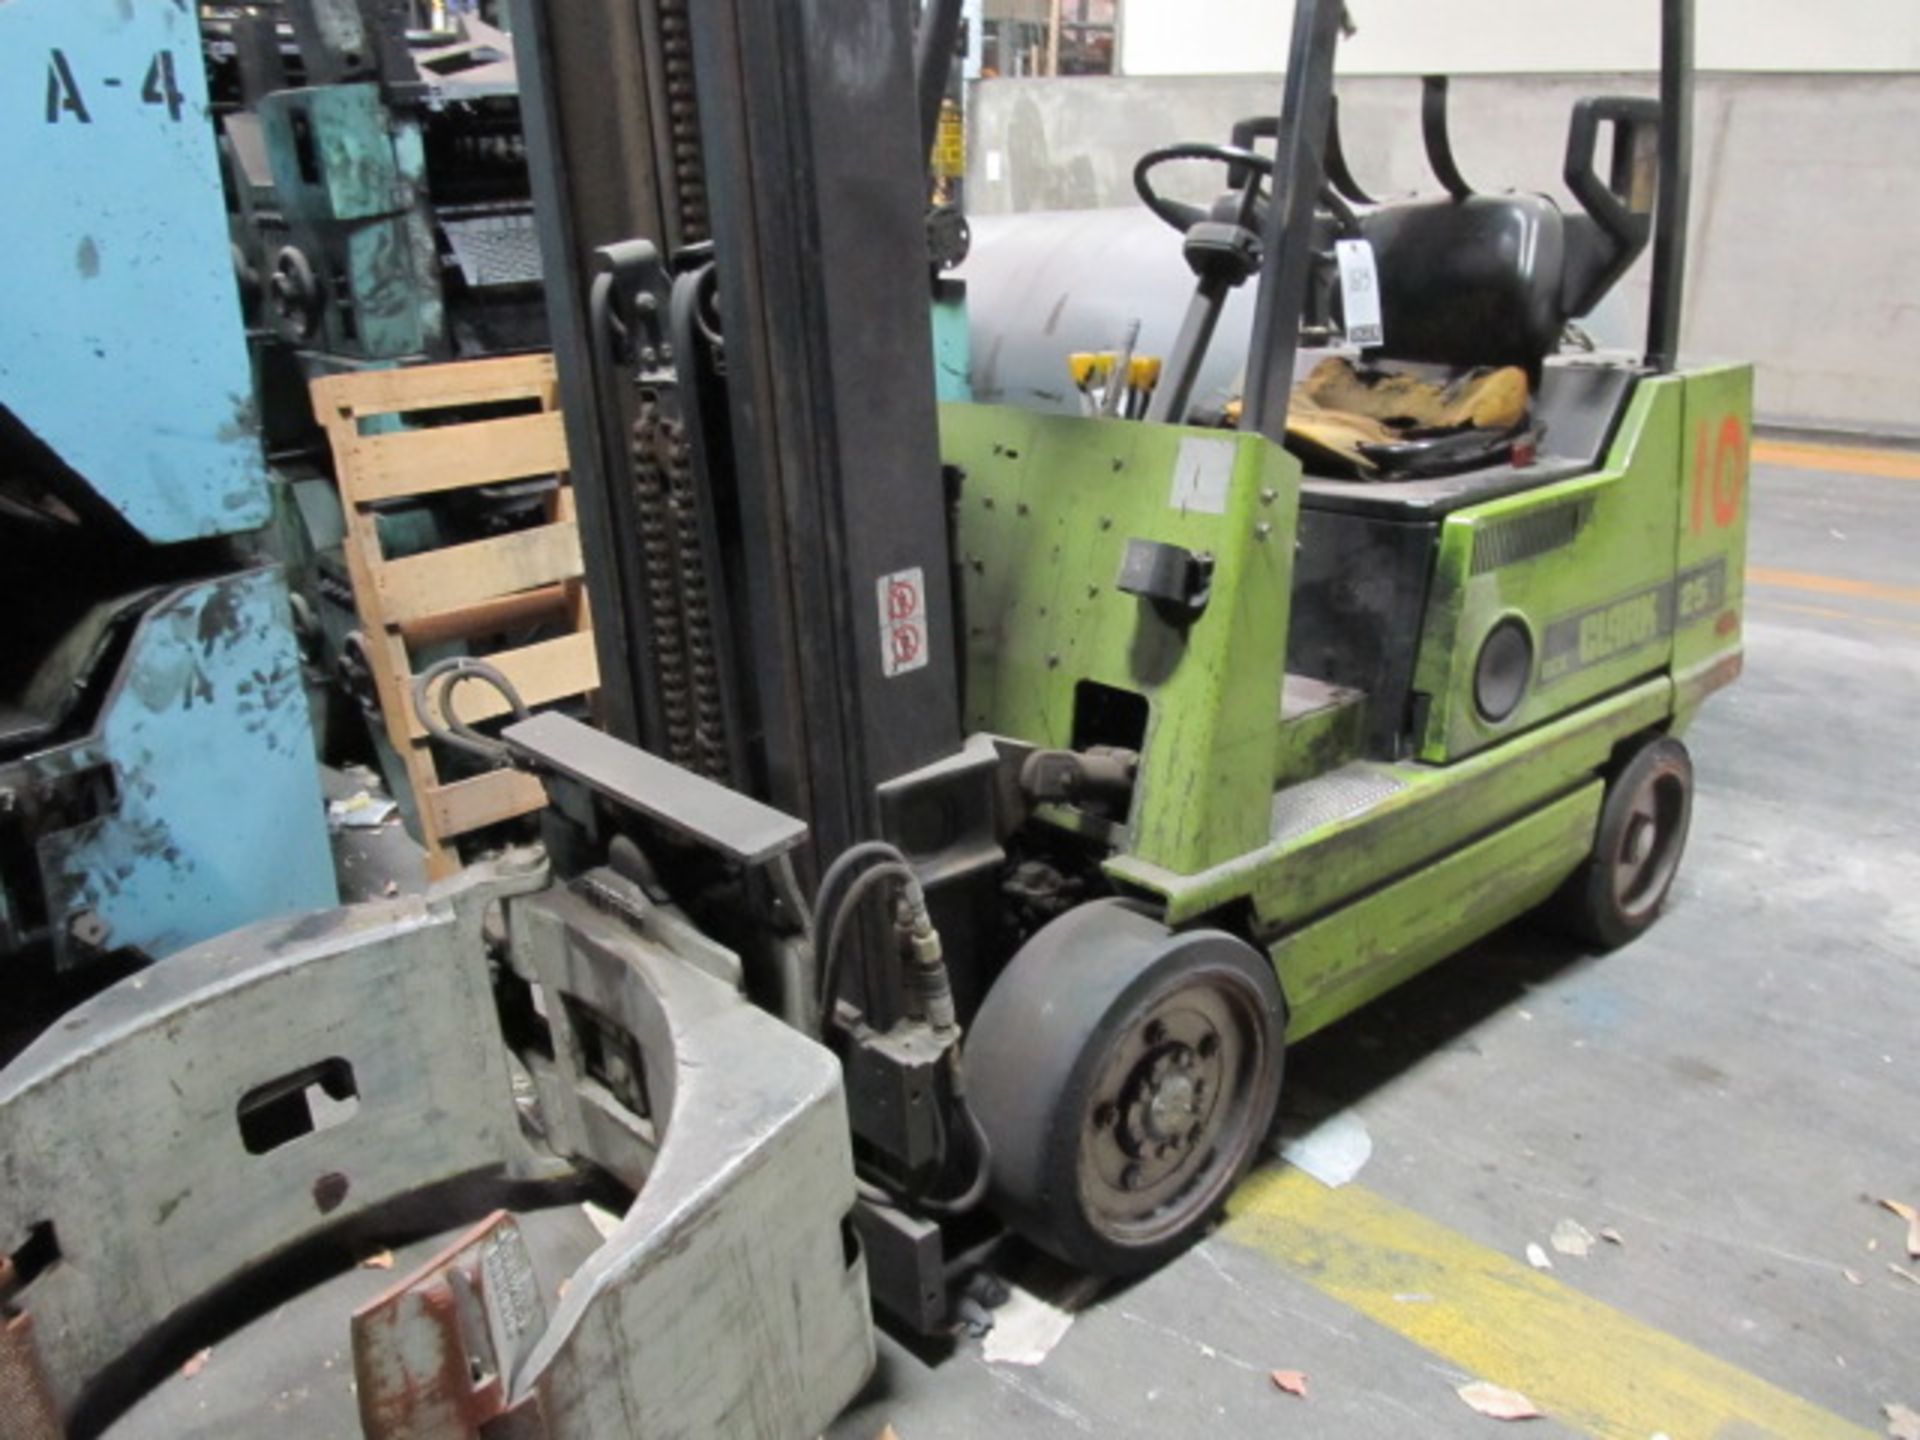 Clark Fork Lift With Roll Clamp, 2 Stage Mast, 4050lb Capacity, 4550 Hours, Model GCX25E-LPG.